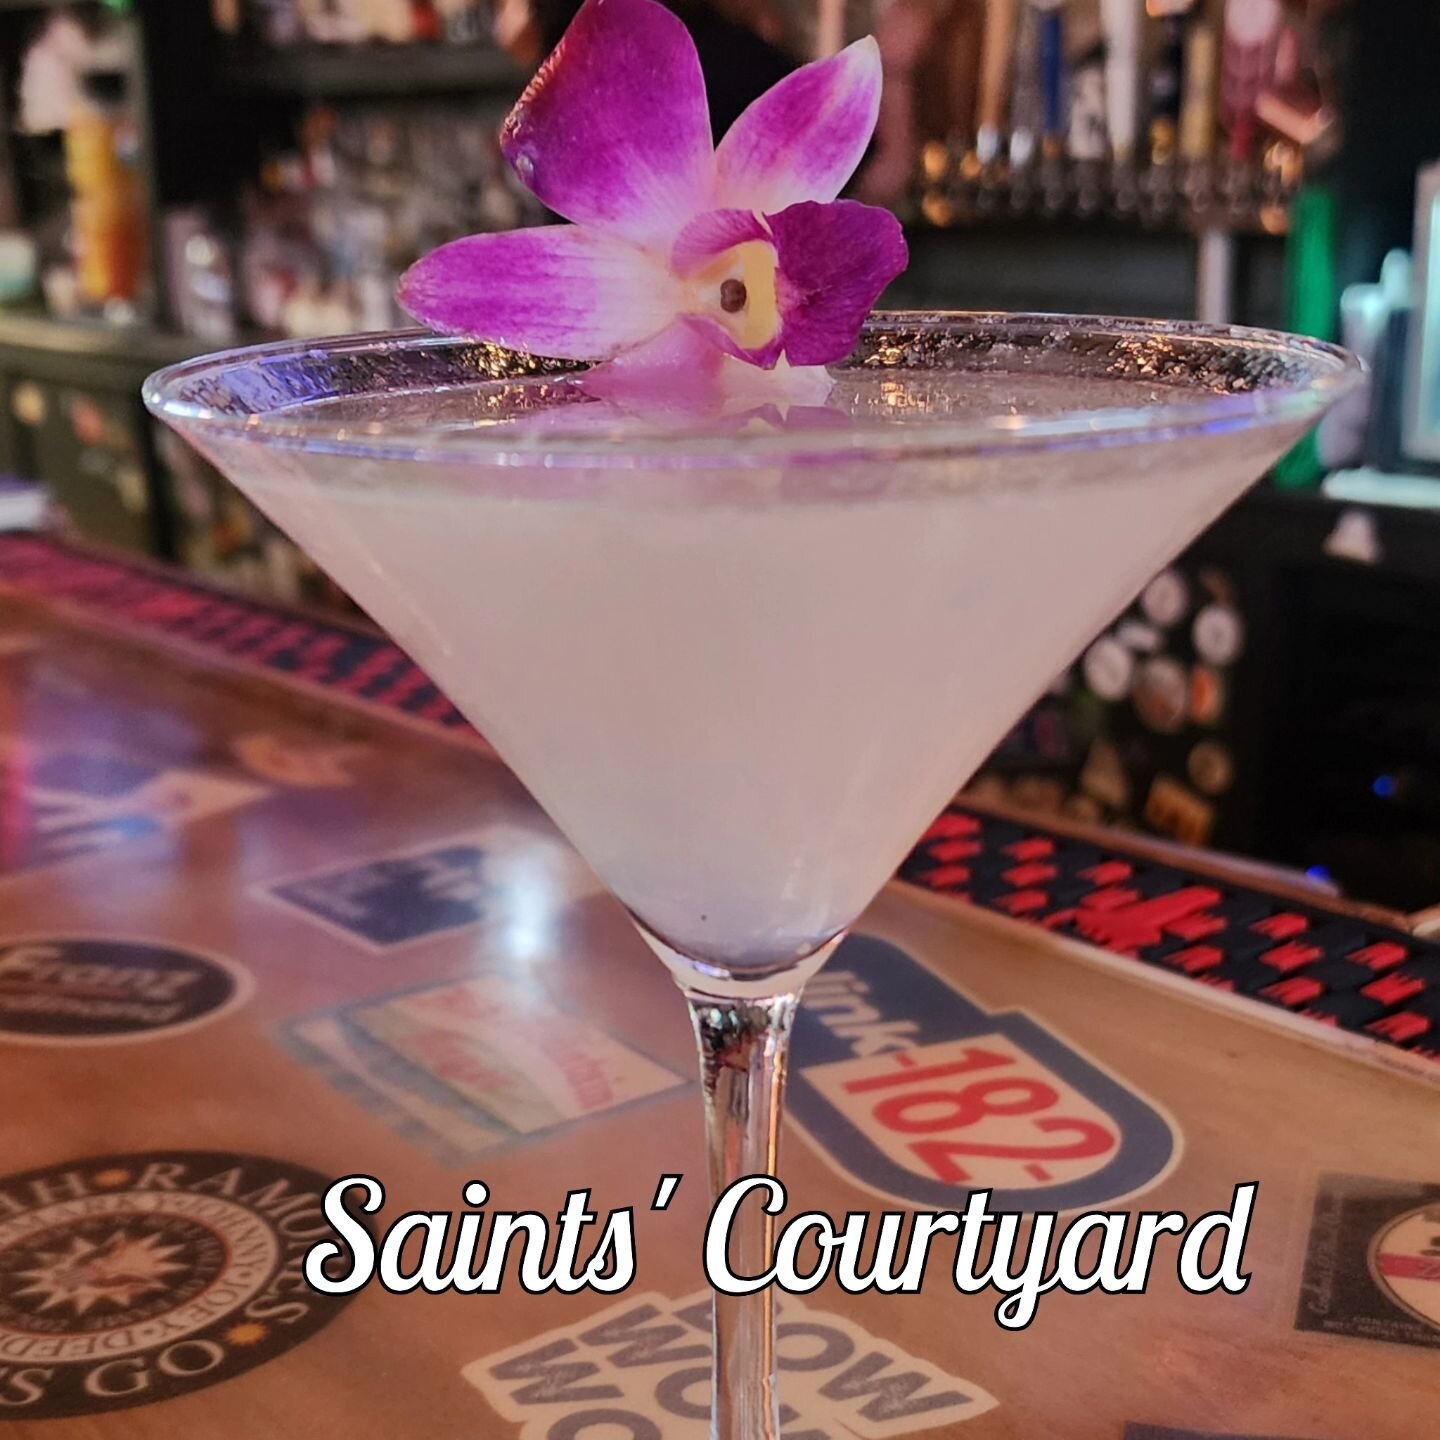 New Spring cocktail menu out now featuring &quot;Saints' Courtyard&quot;! Visit your favorite BratHaus bartender for one today!